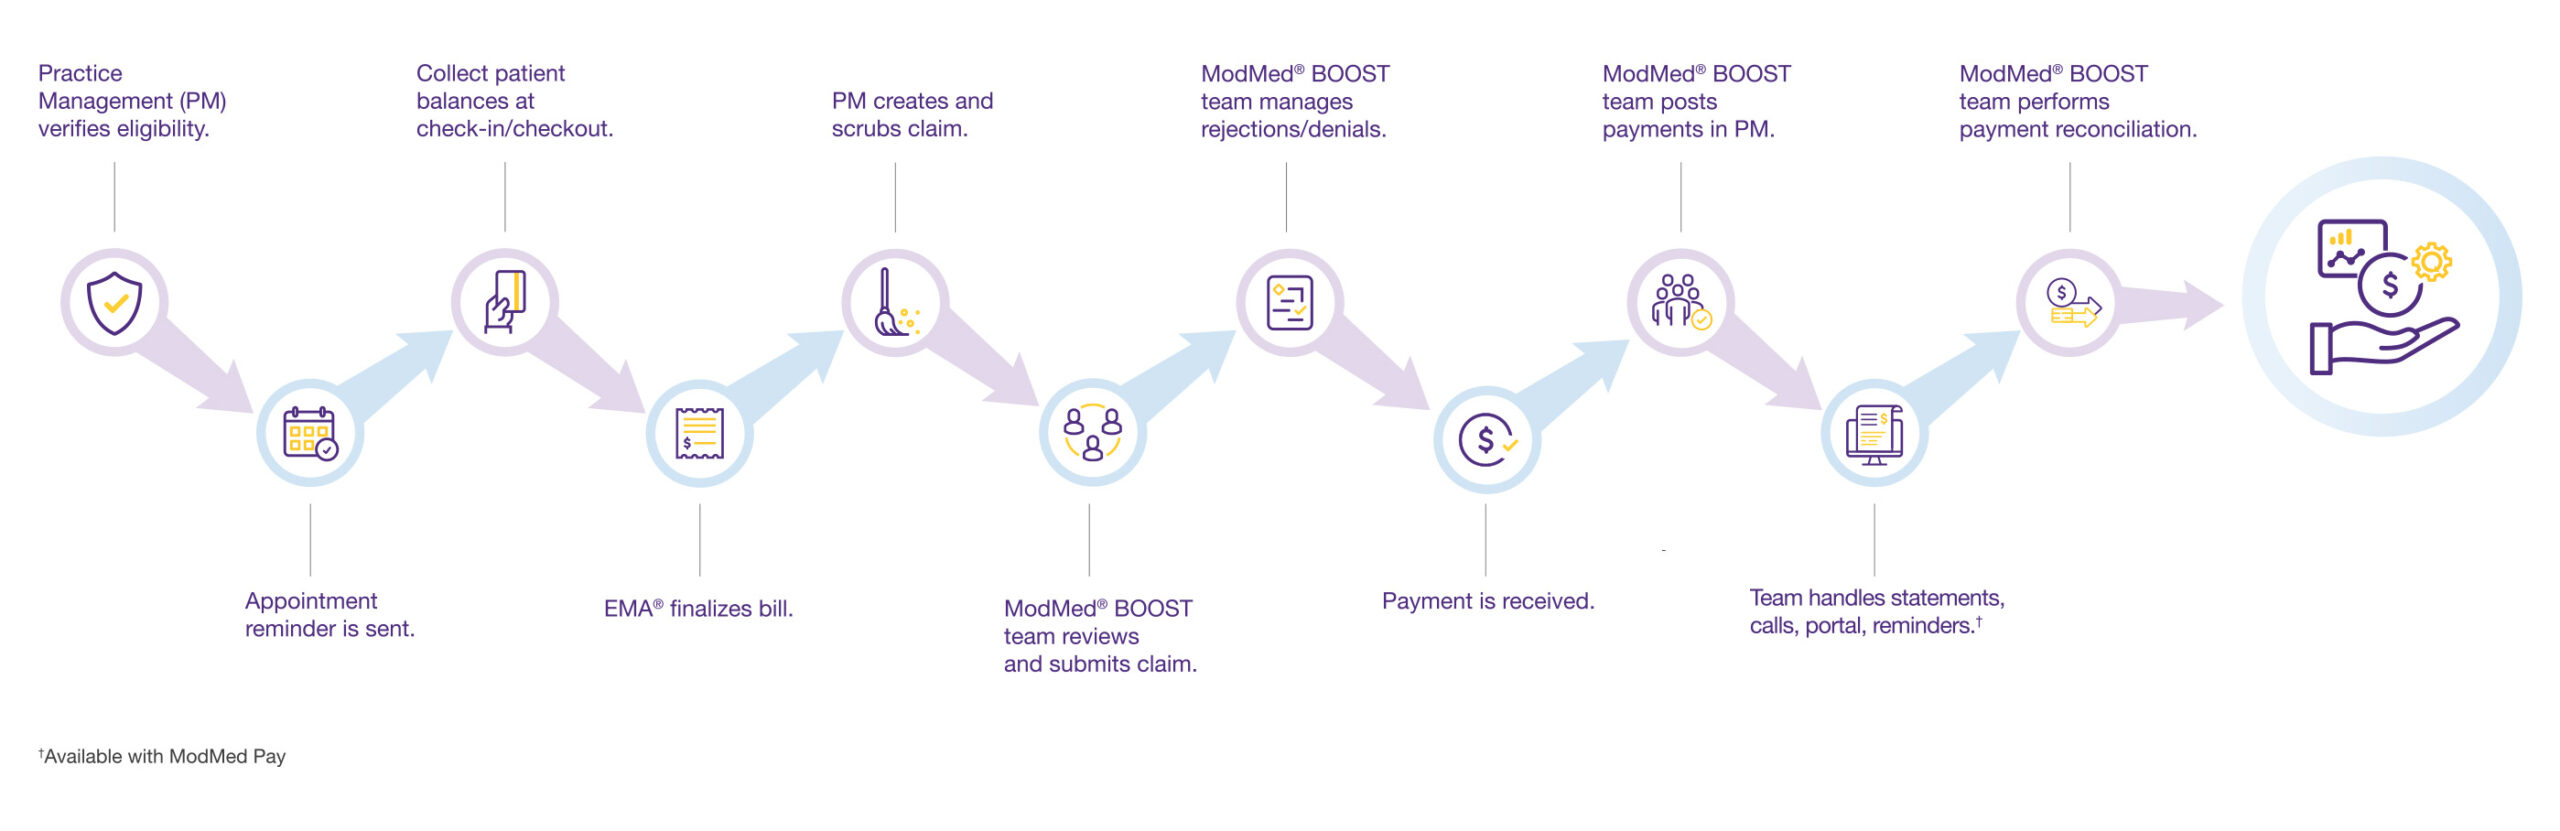 Flow chart of ModMed BOOST RCM services